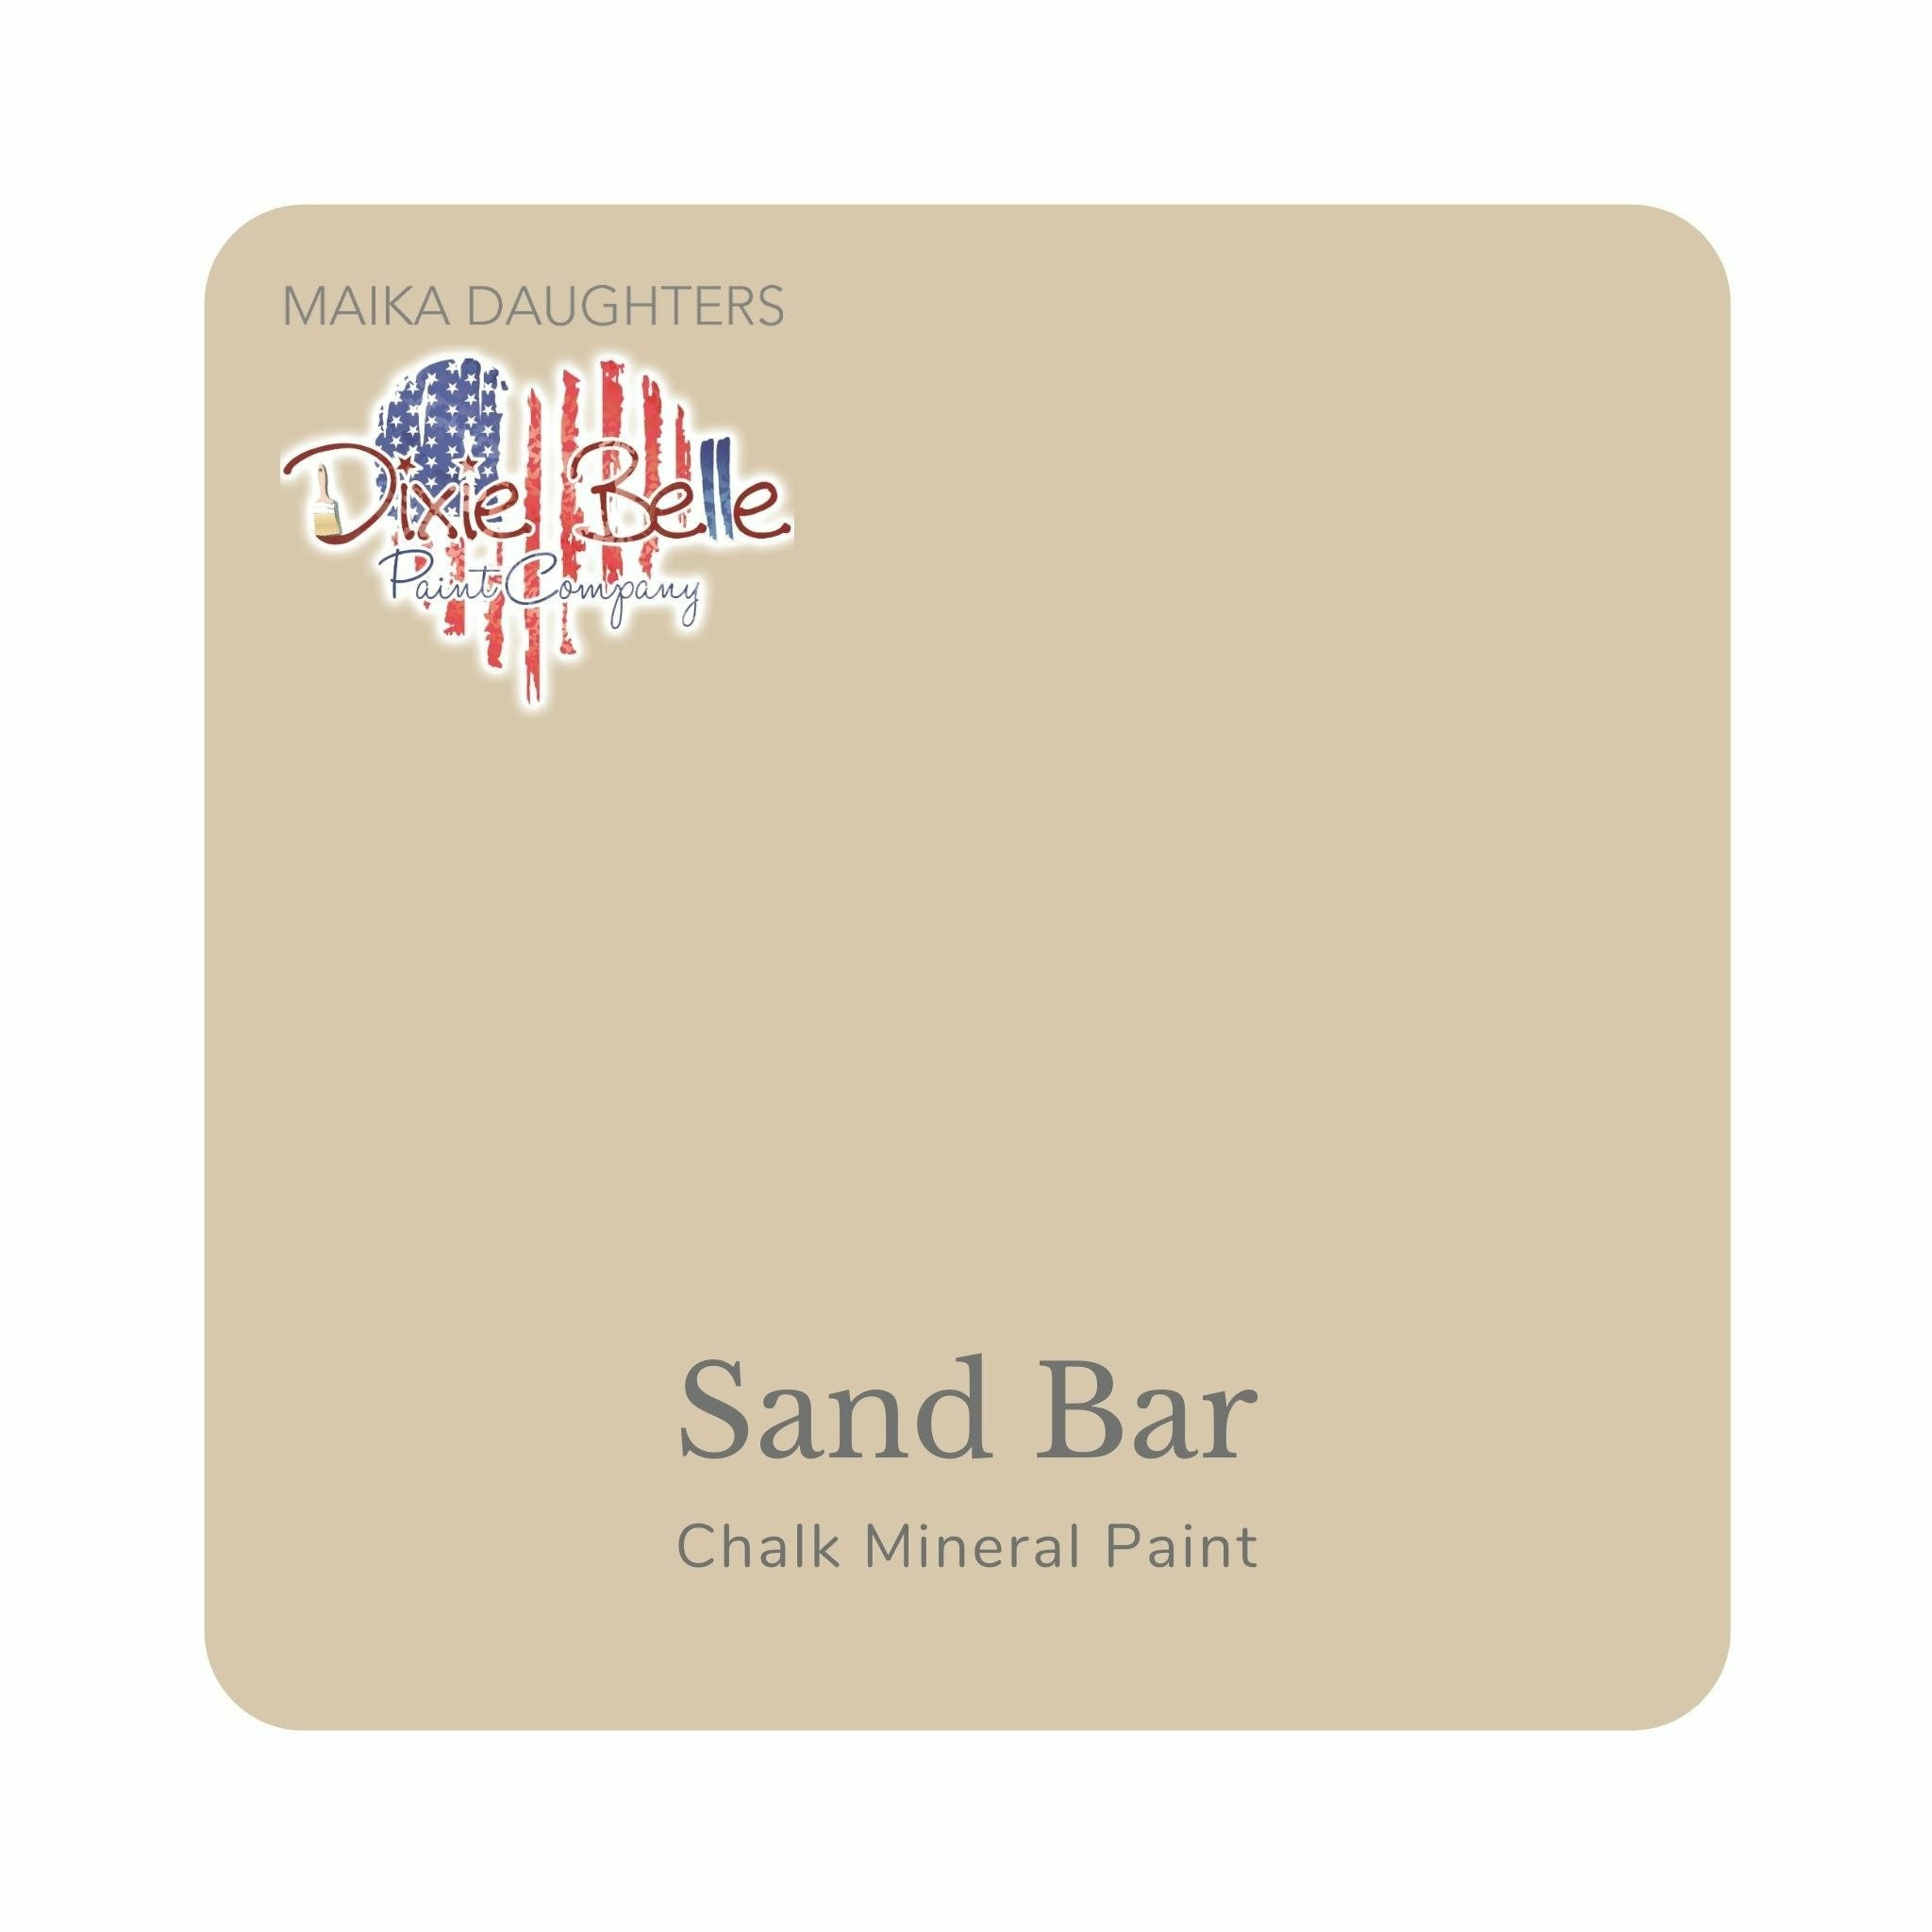 A square swatch card of Dixie Belle Paint Company’s Sand Bar Chalk Mineral Paint is against a white background. This color is a light neutral beige.